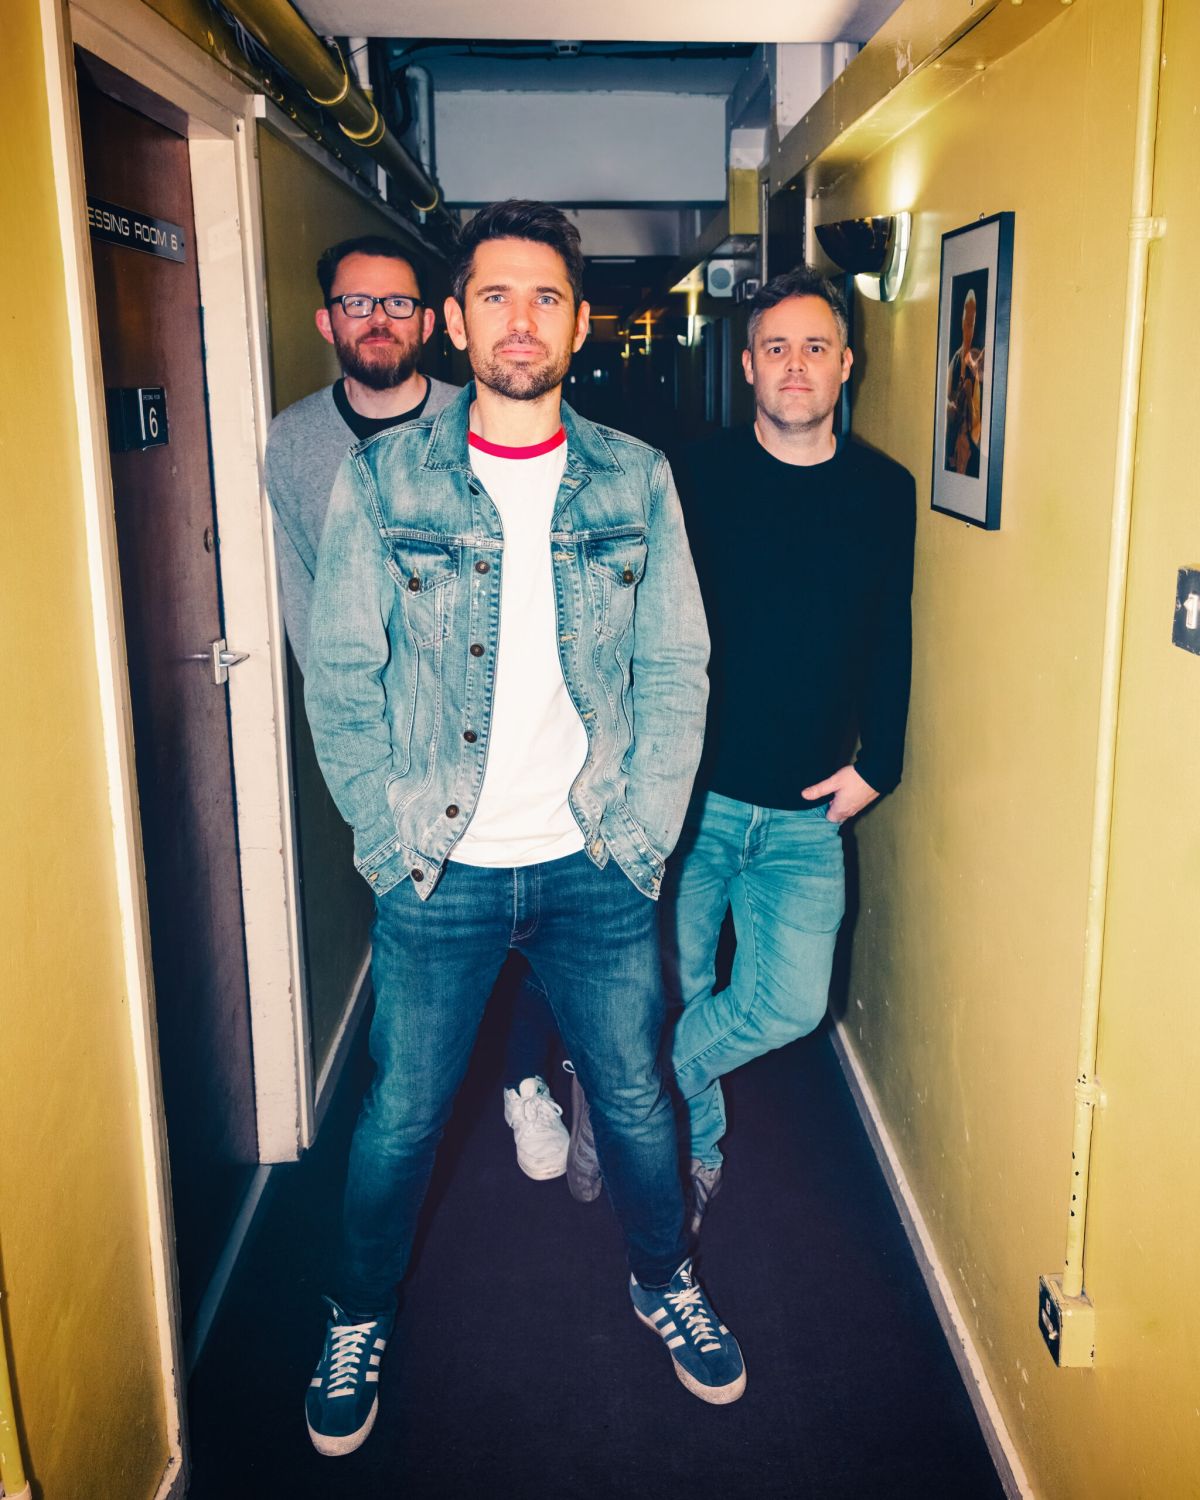 Scouting for Girls live in Manchester: A teenage dream revived